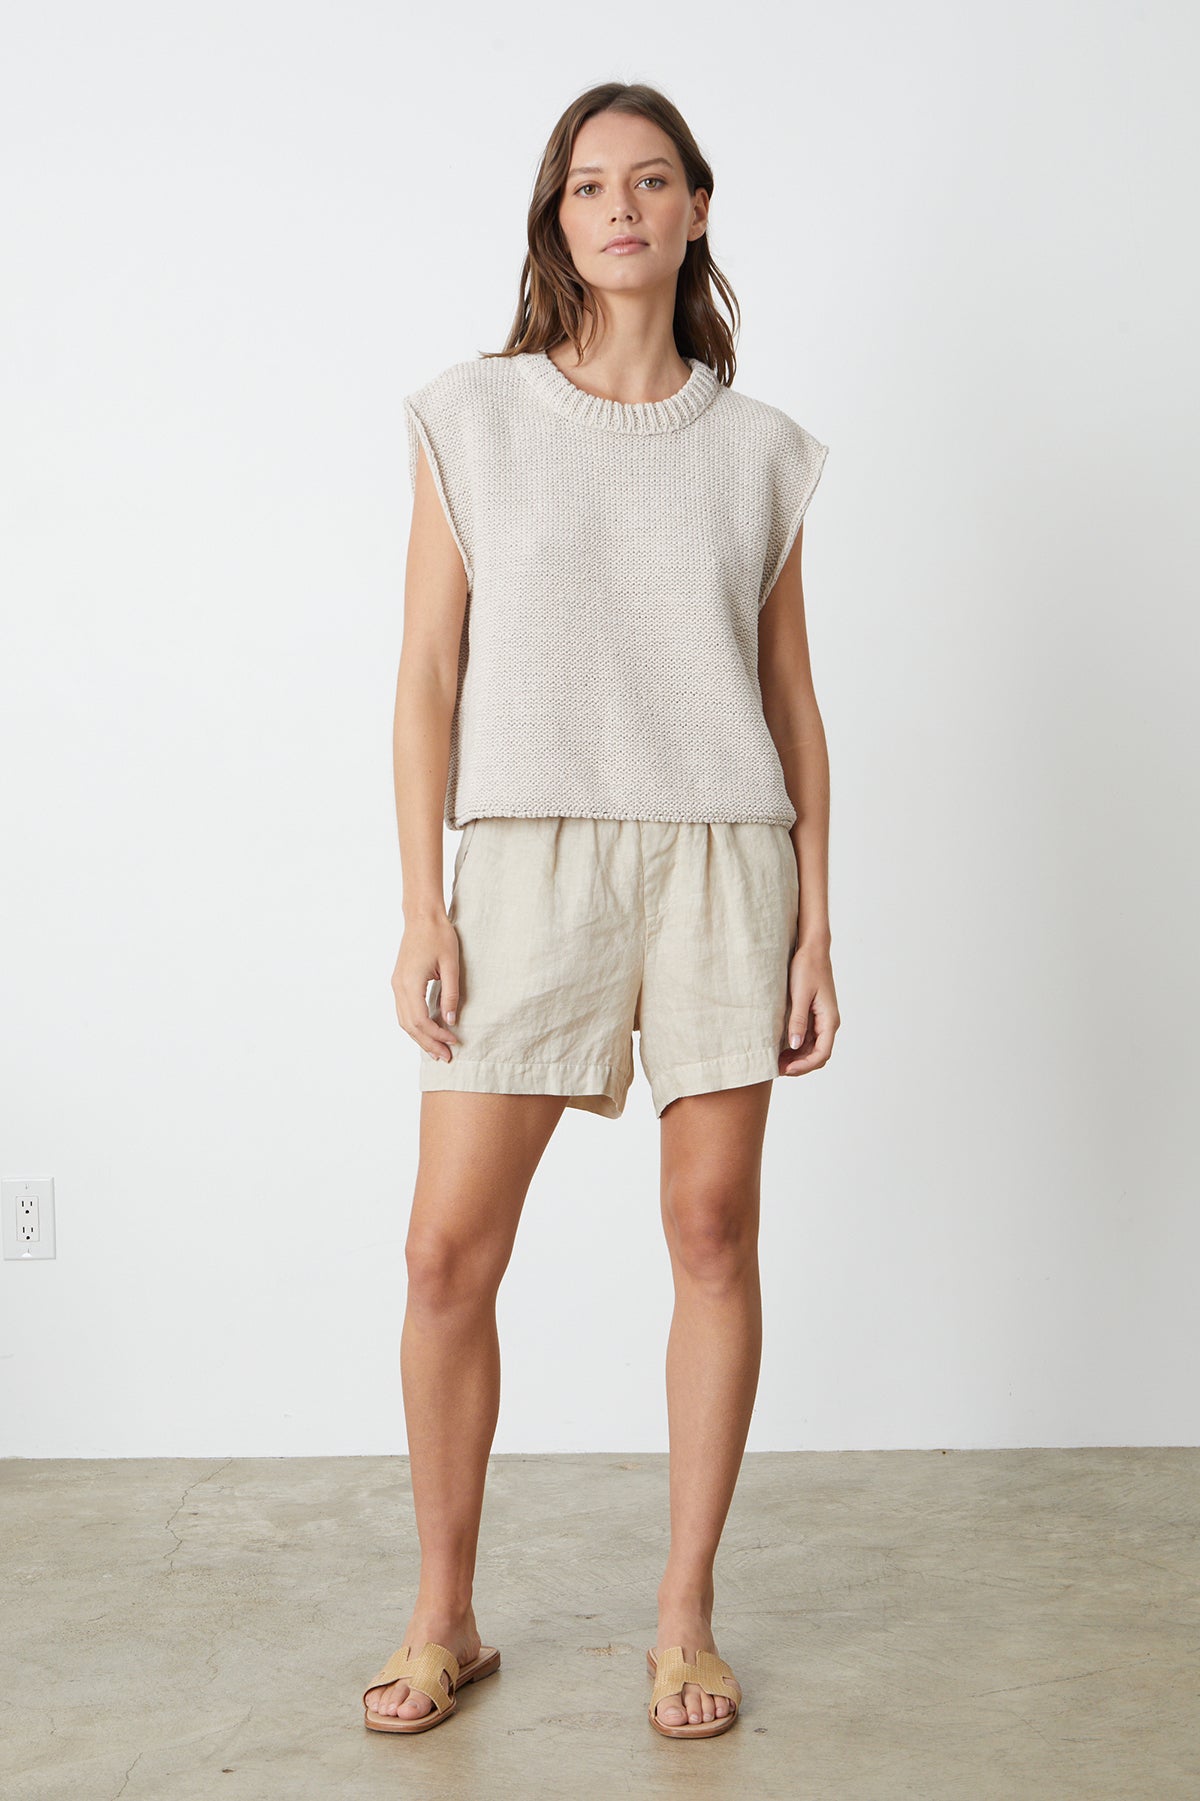 The model is wearing a Velvet by Graham & Spencer SAGE CREW NECK SWEATER and shorts.-26342770770113